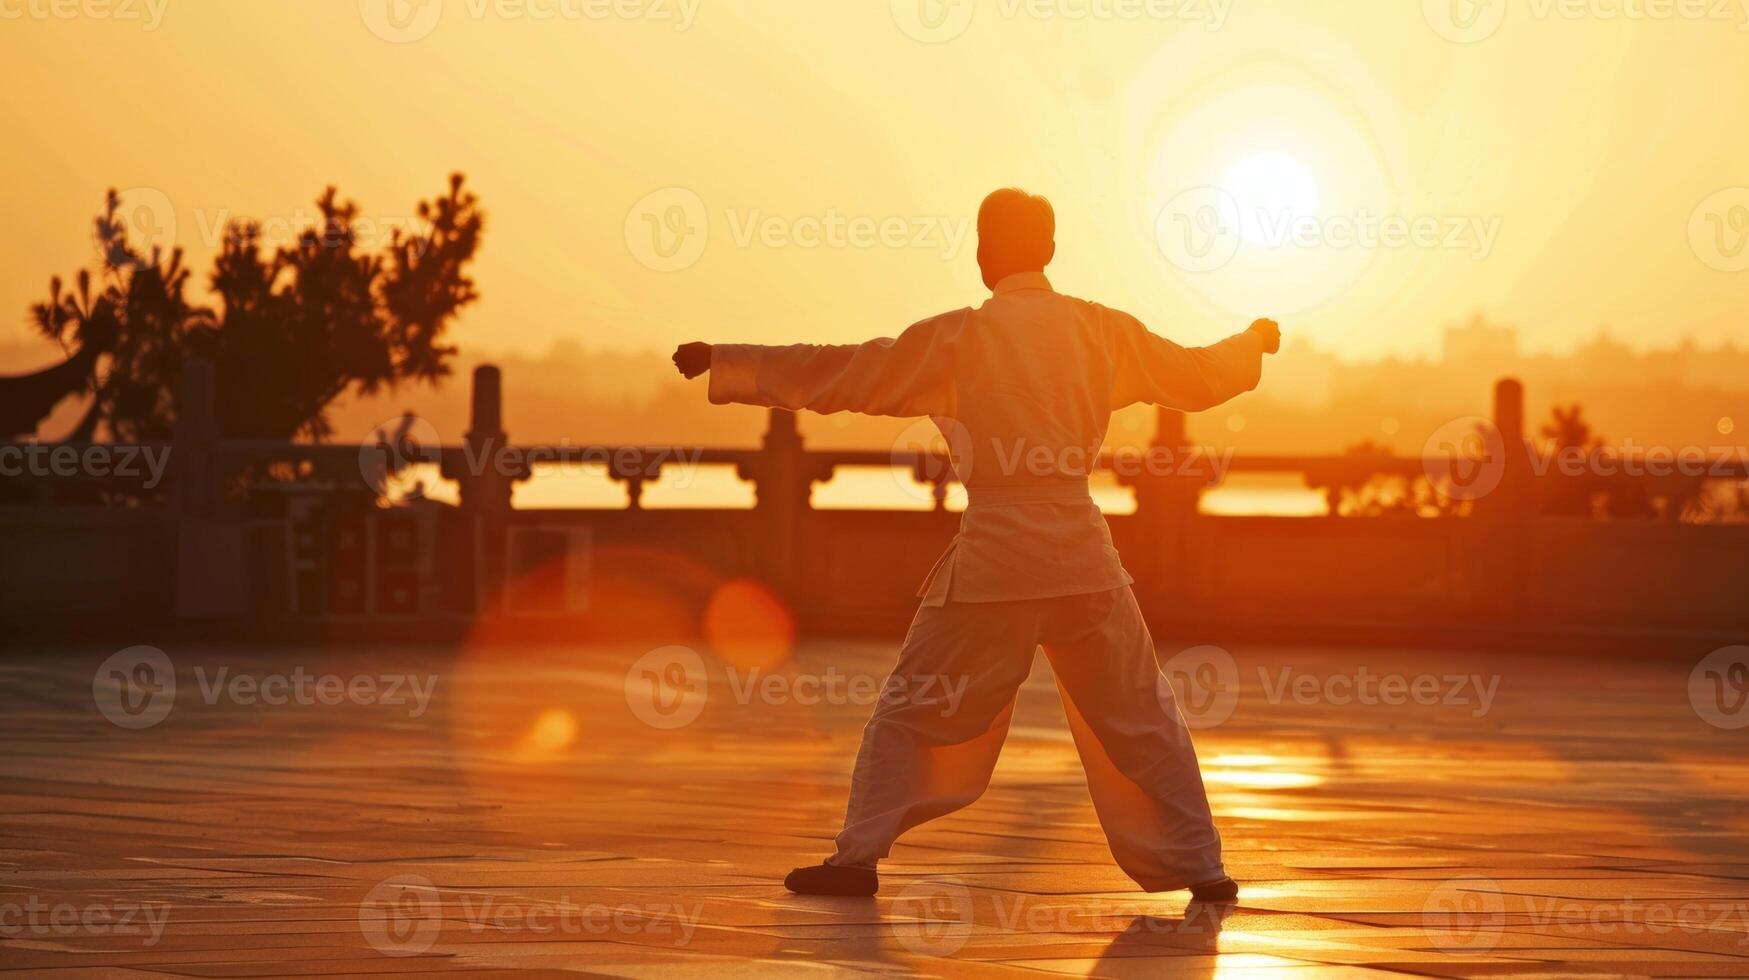 The warm light of the sun slowly enveloped the rooftop amplifying the energy and serenity of the tai chi practice. 2d flat cartoon photo